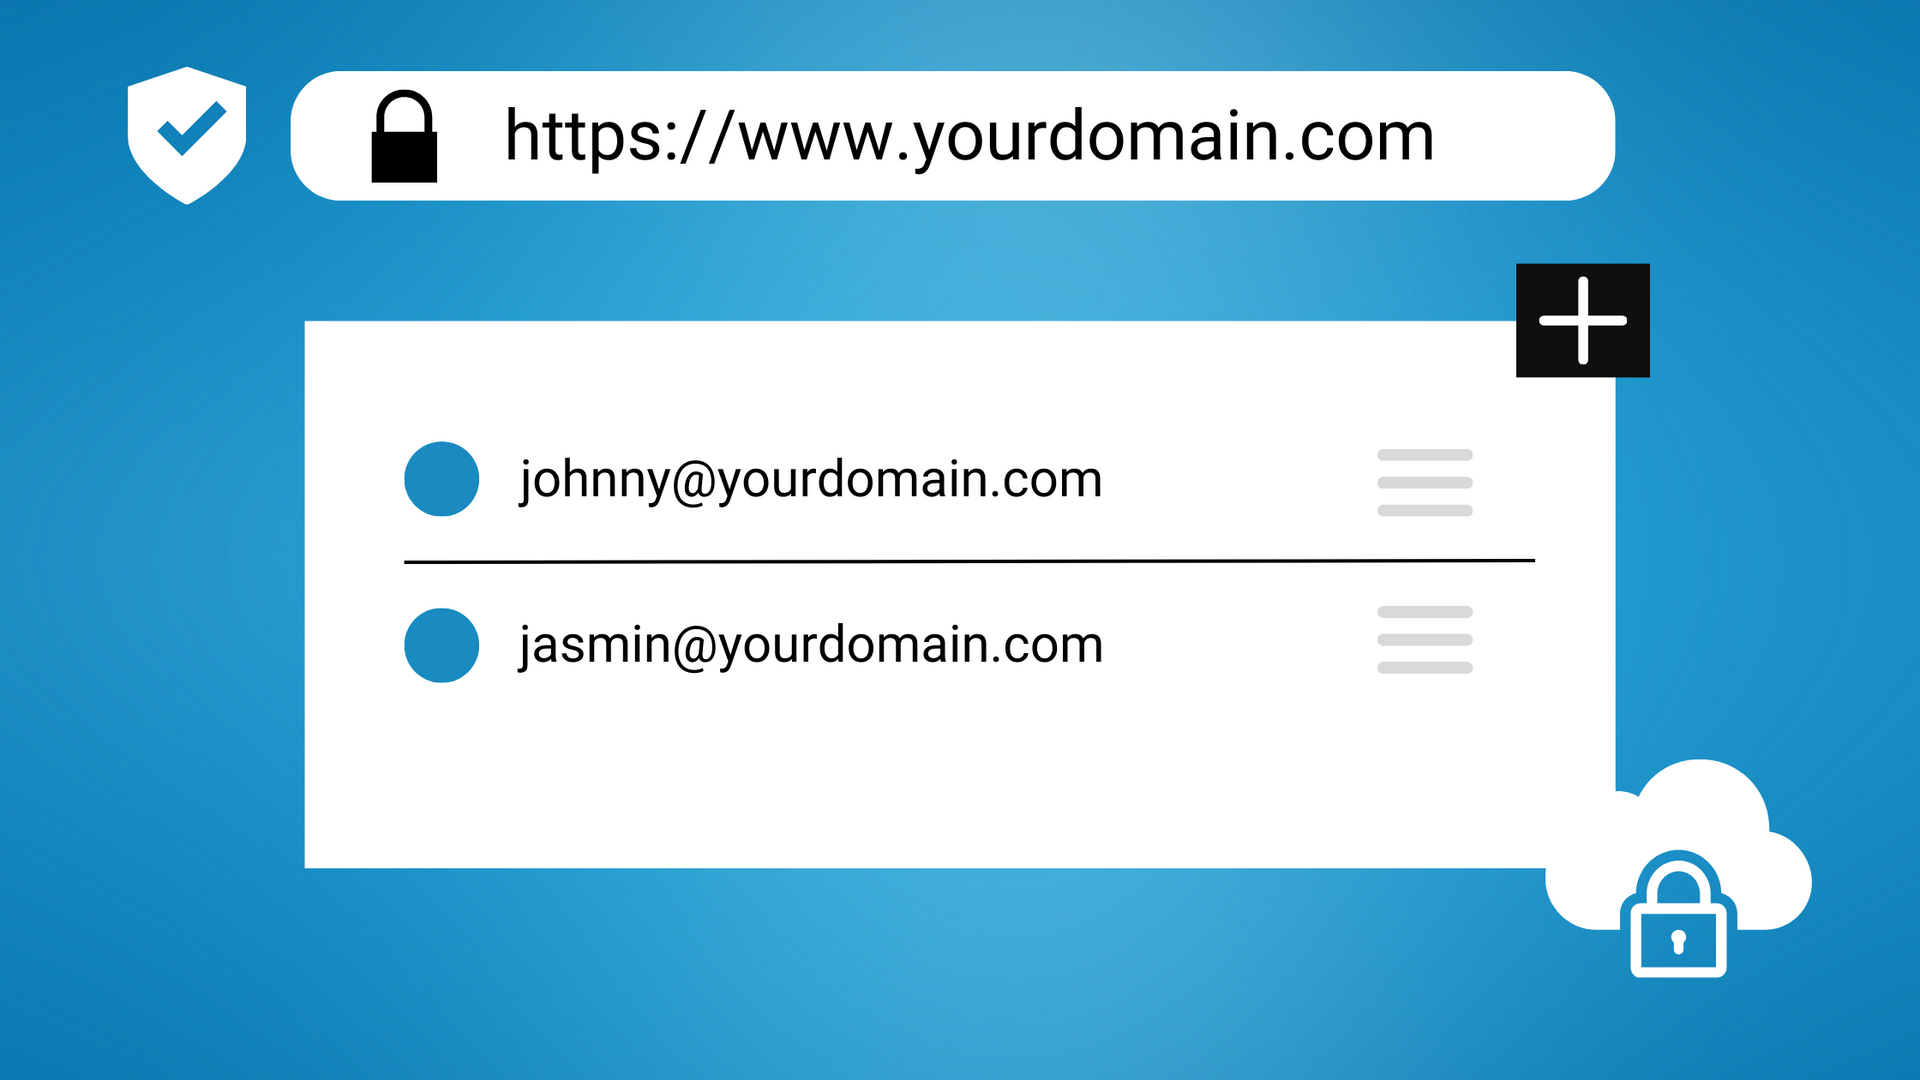 A screenshot of a website that says https://www.yourdomain.com